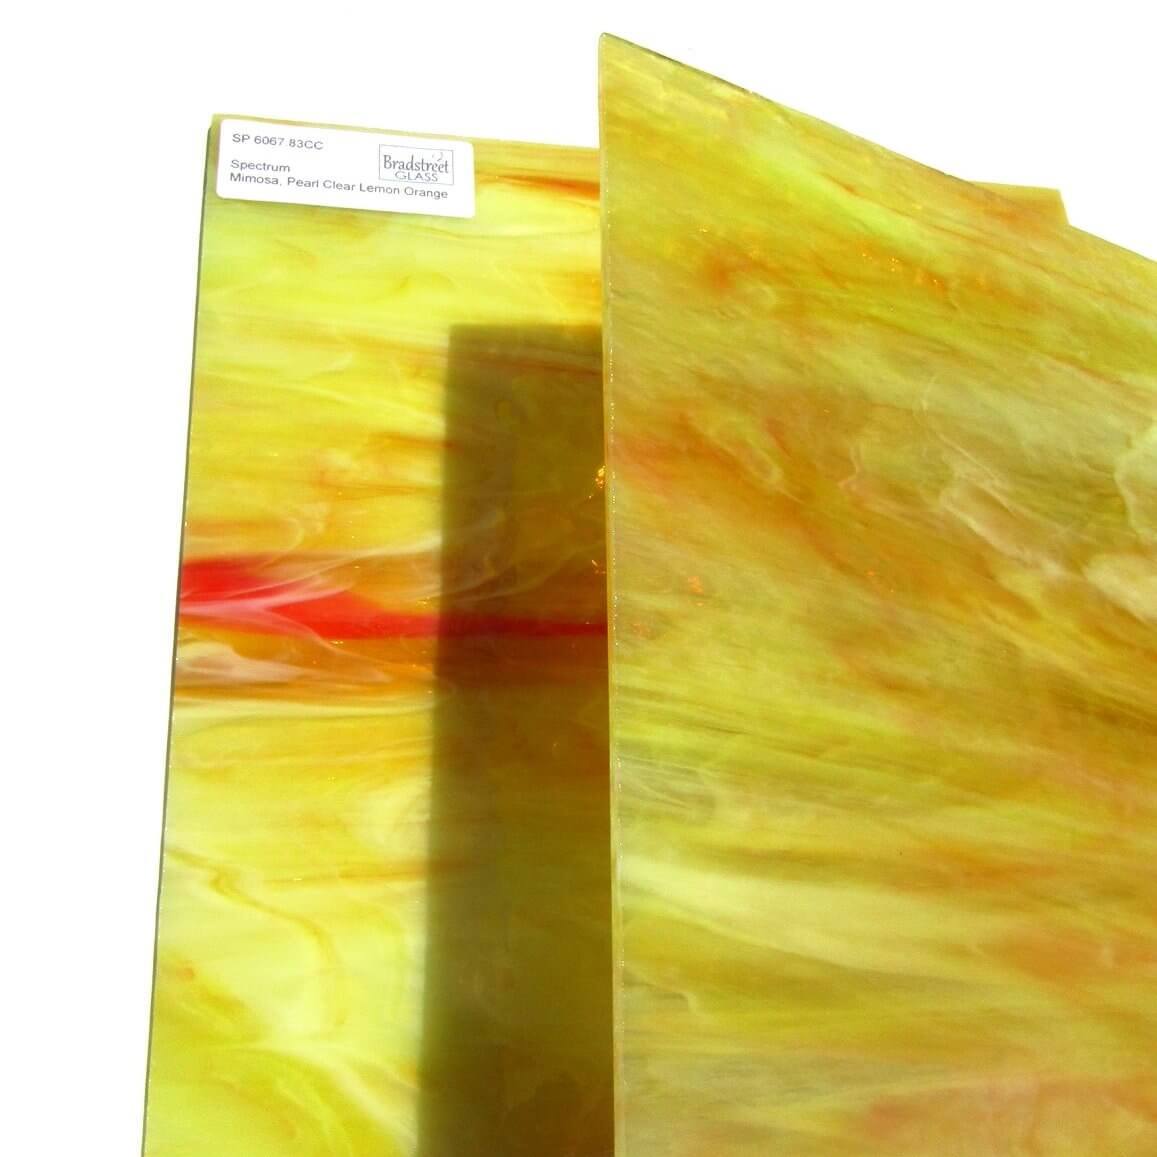 Spectrum 6067.83CC Mimosa Pearl Opal Stained Glass Sheet Opaque Ripple Textured Pearl Clear Lemon Orange 